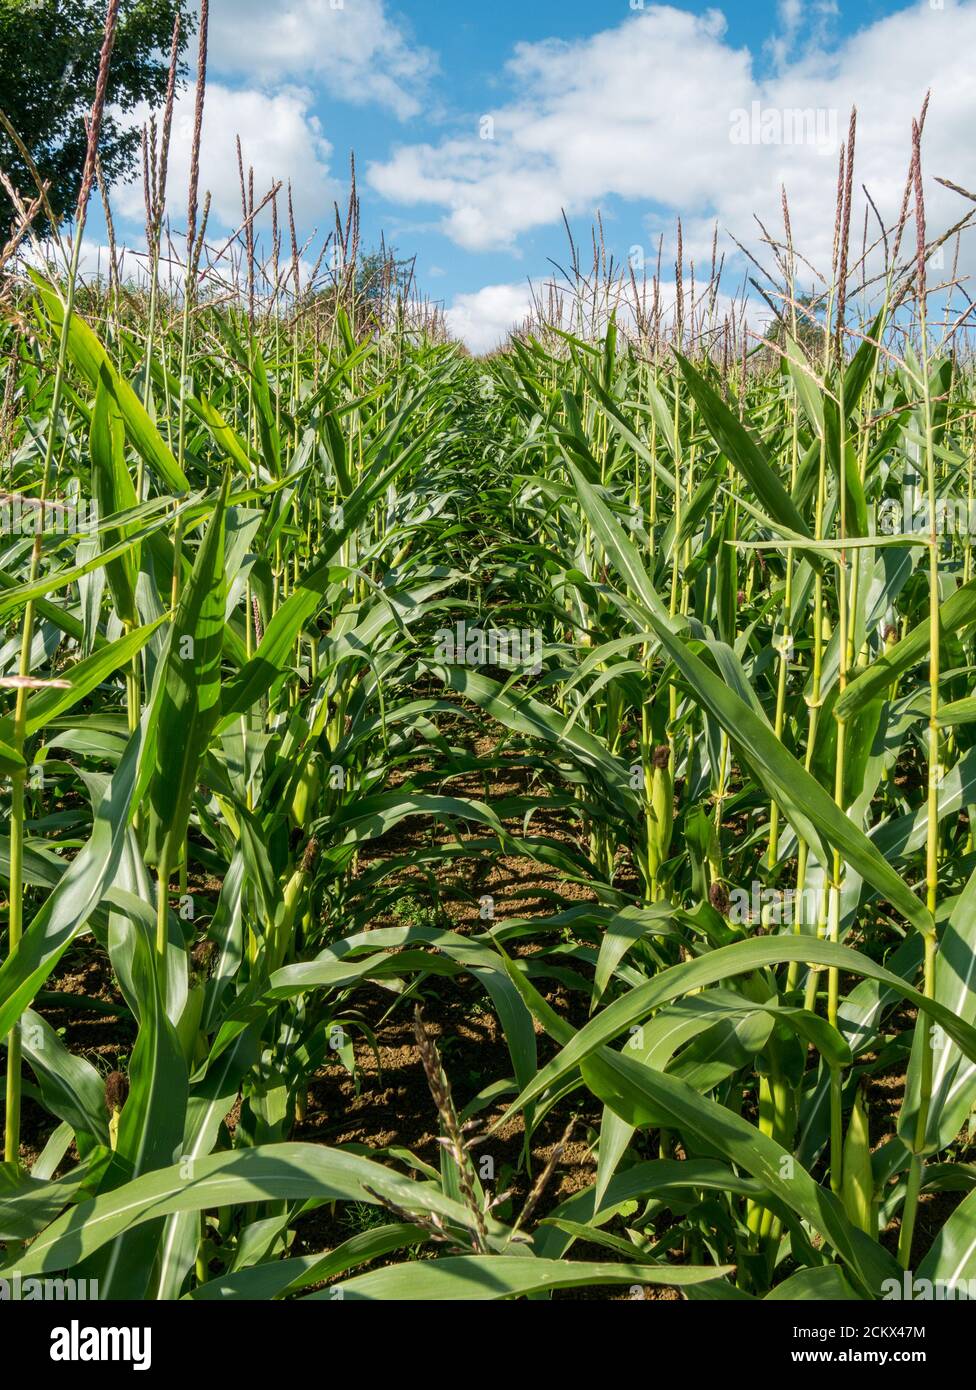 Sunlit rows of tall green maize or sweet corn crop plants growing in UK farmer's field with blue sky above in September, Leicestershire, England, UK Stock Photo